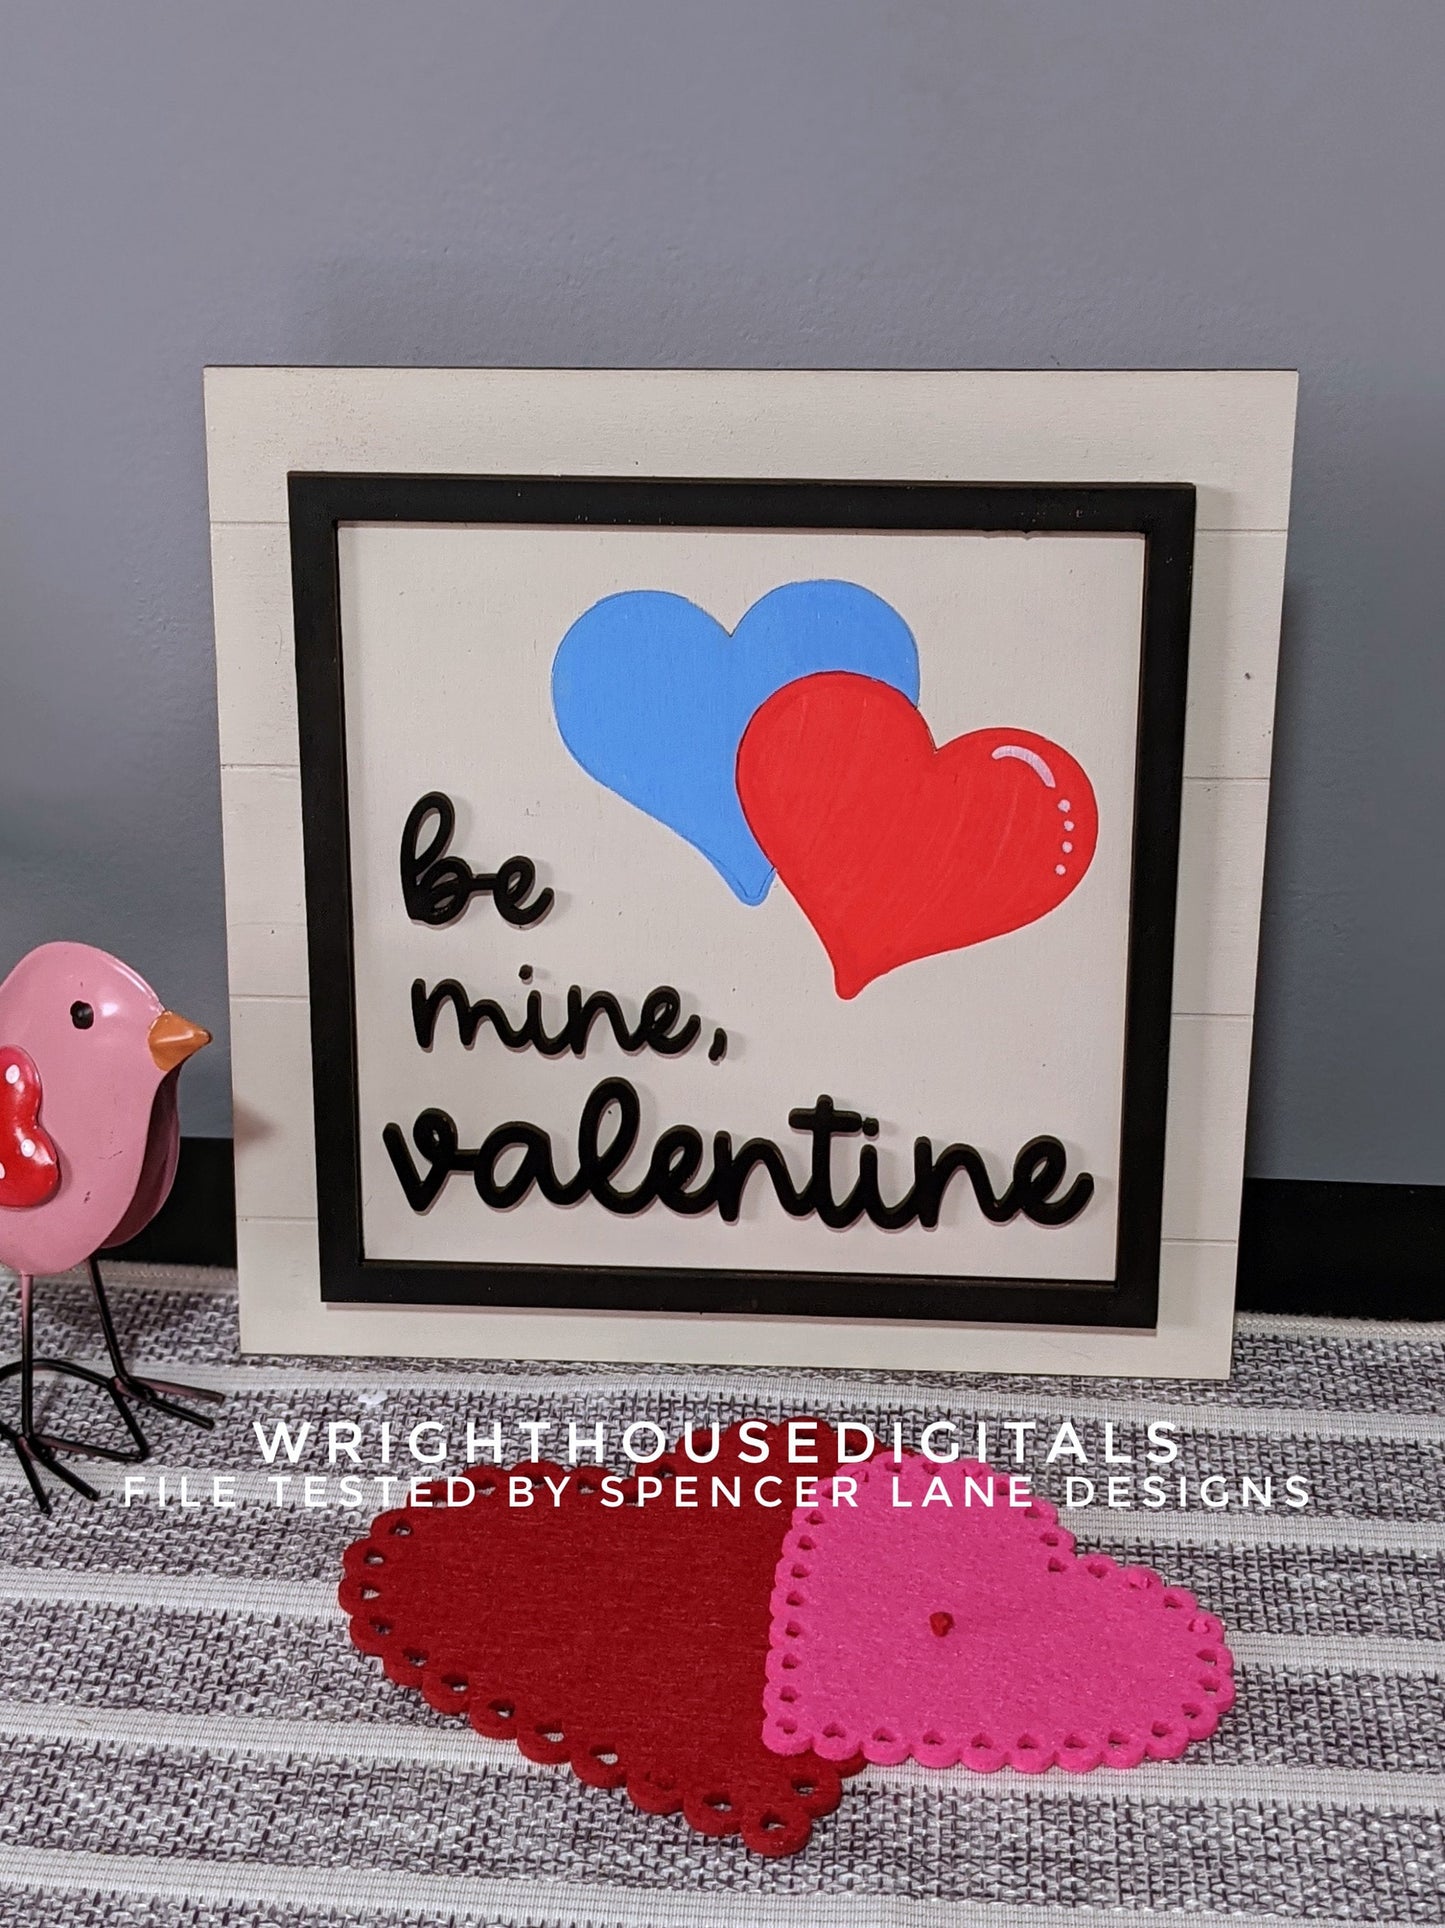 Be Mine Valentine Hearts Shiplap Shelf Sitter - Round and Square Frames - Files for Sign Making - SVG Cut File For Glowforge - Digital File